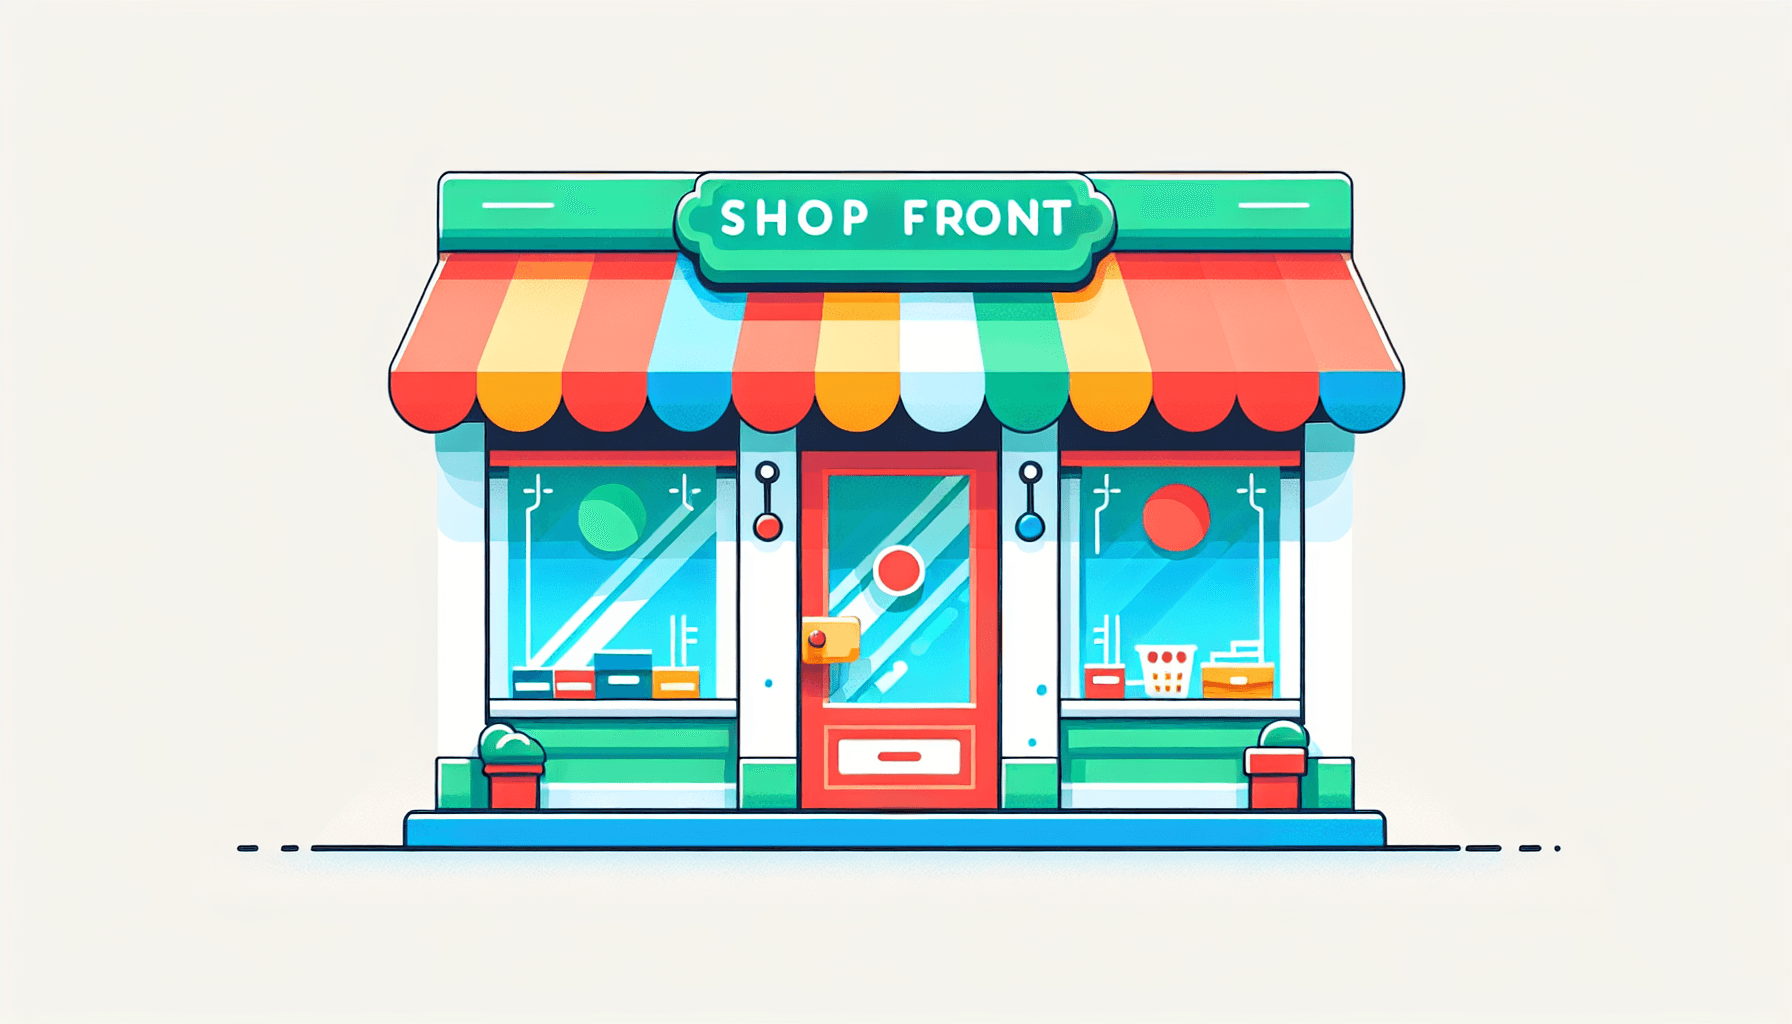 Shopfront in flat illustration style and white background, red #f47574, green #88c7a8, yellow #fcc44b, and blue #645bc8 colors.